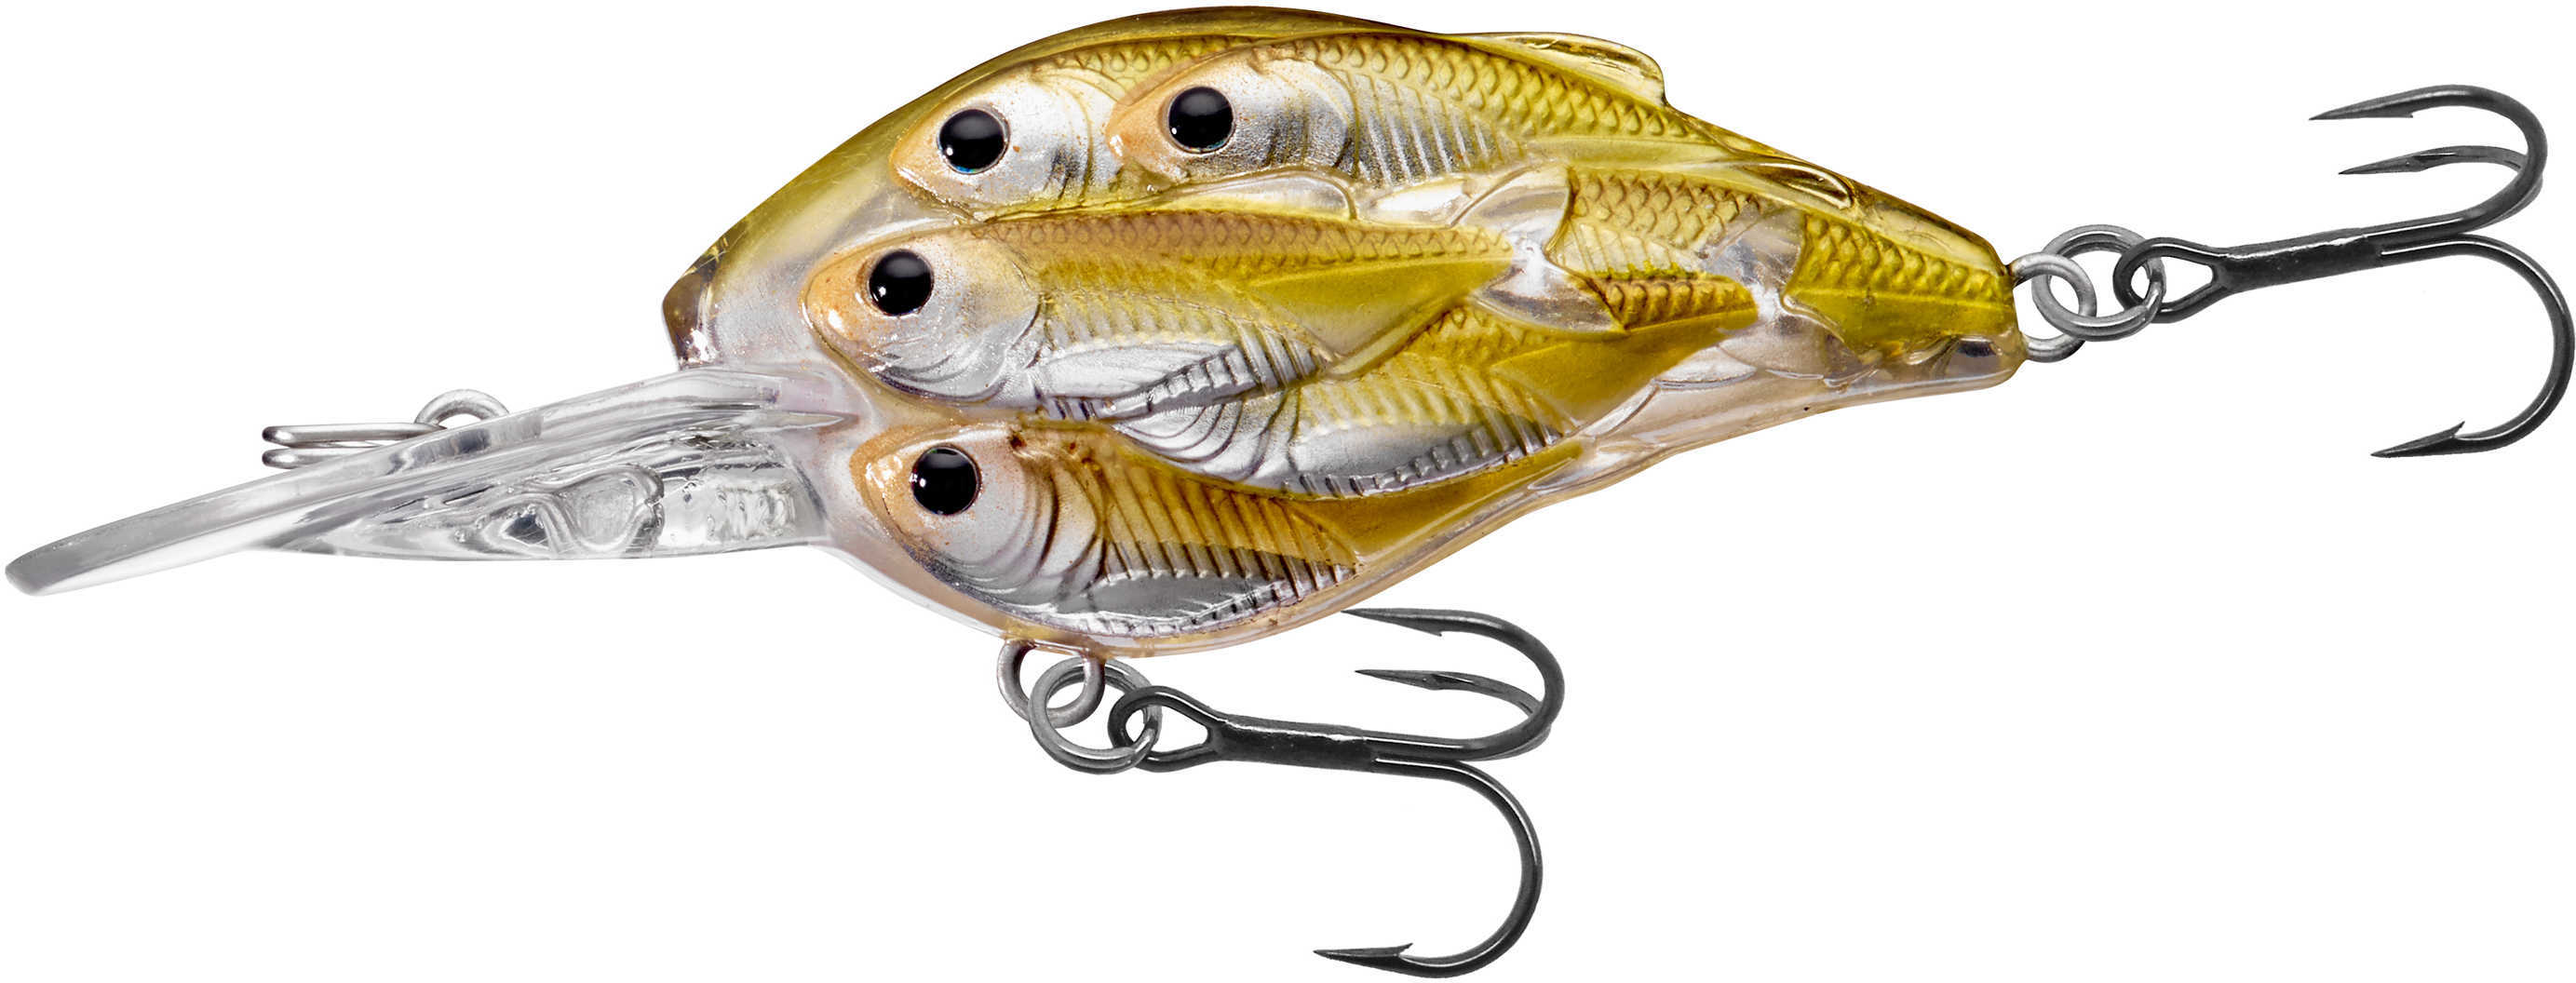 LIVETARGET Lures / Koppers Fishing and Tackle Corp Yearling Baitball Crankbait Pearl/Olive Shad #6 Md: YCB50M815